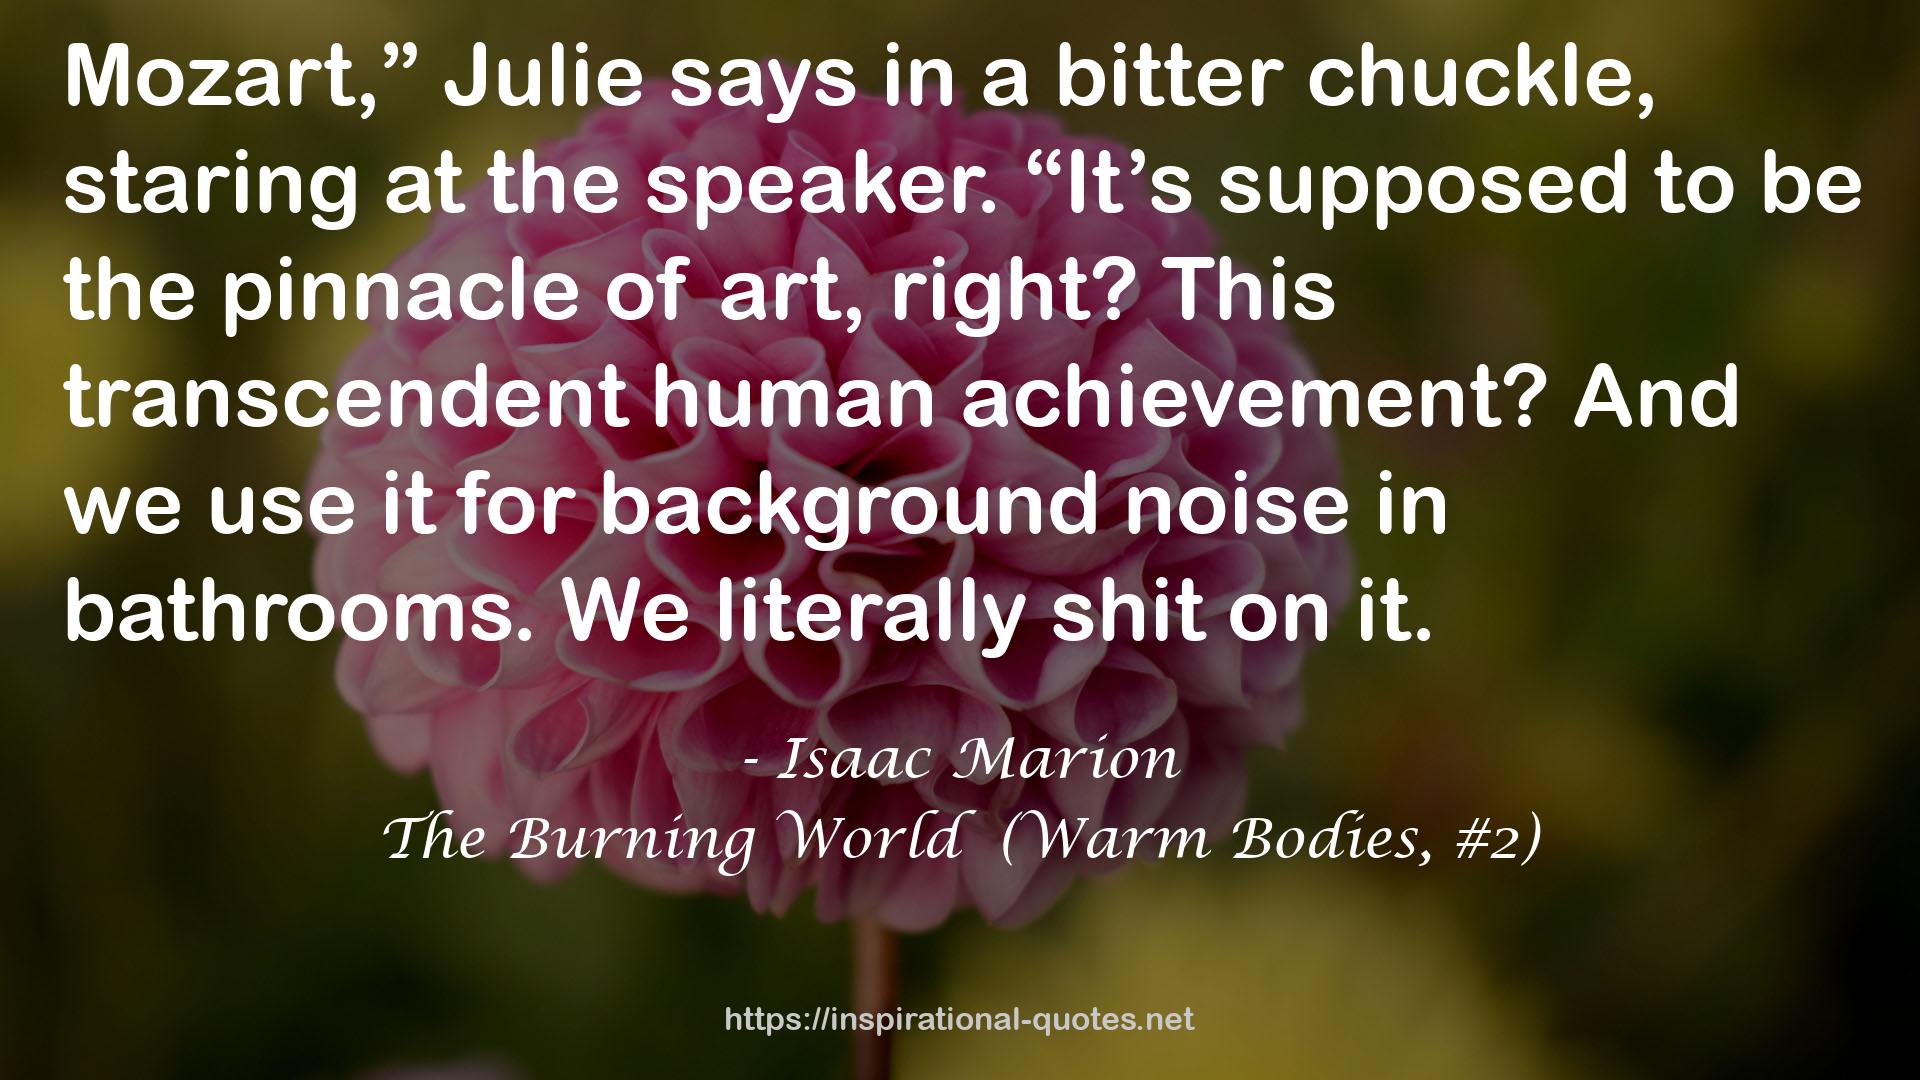 The Burning World  (Warm Bodies, #2) QUOTES